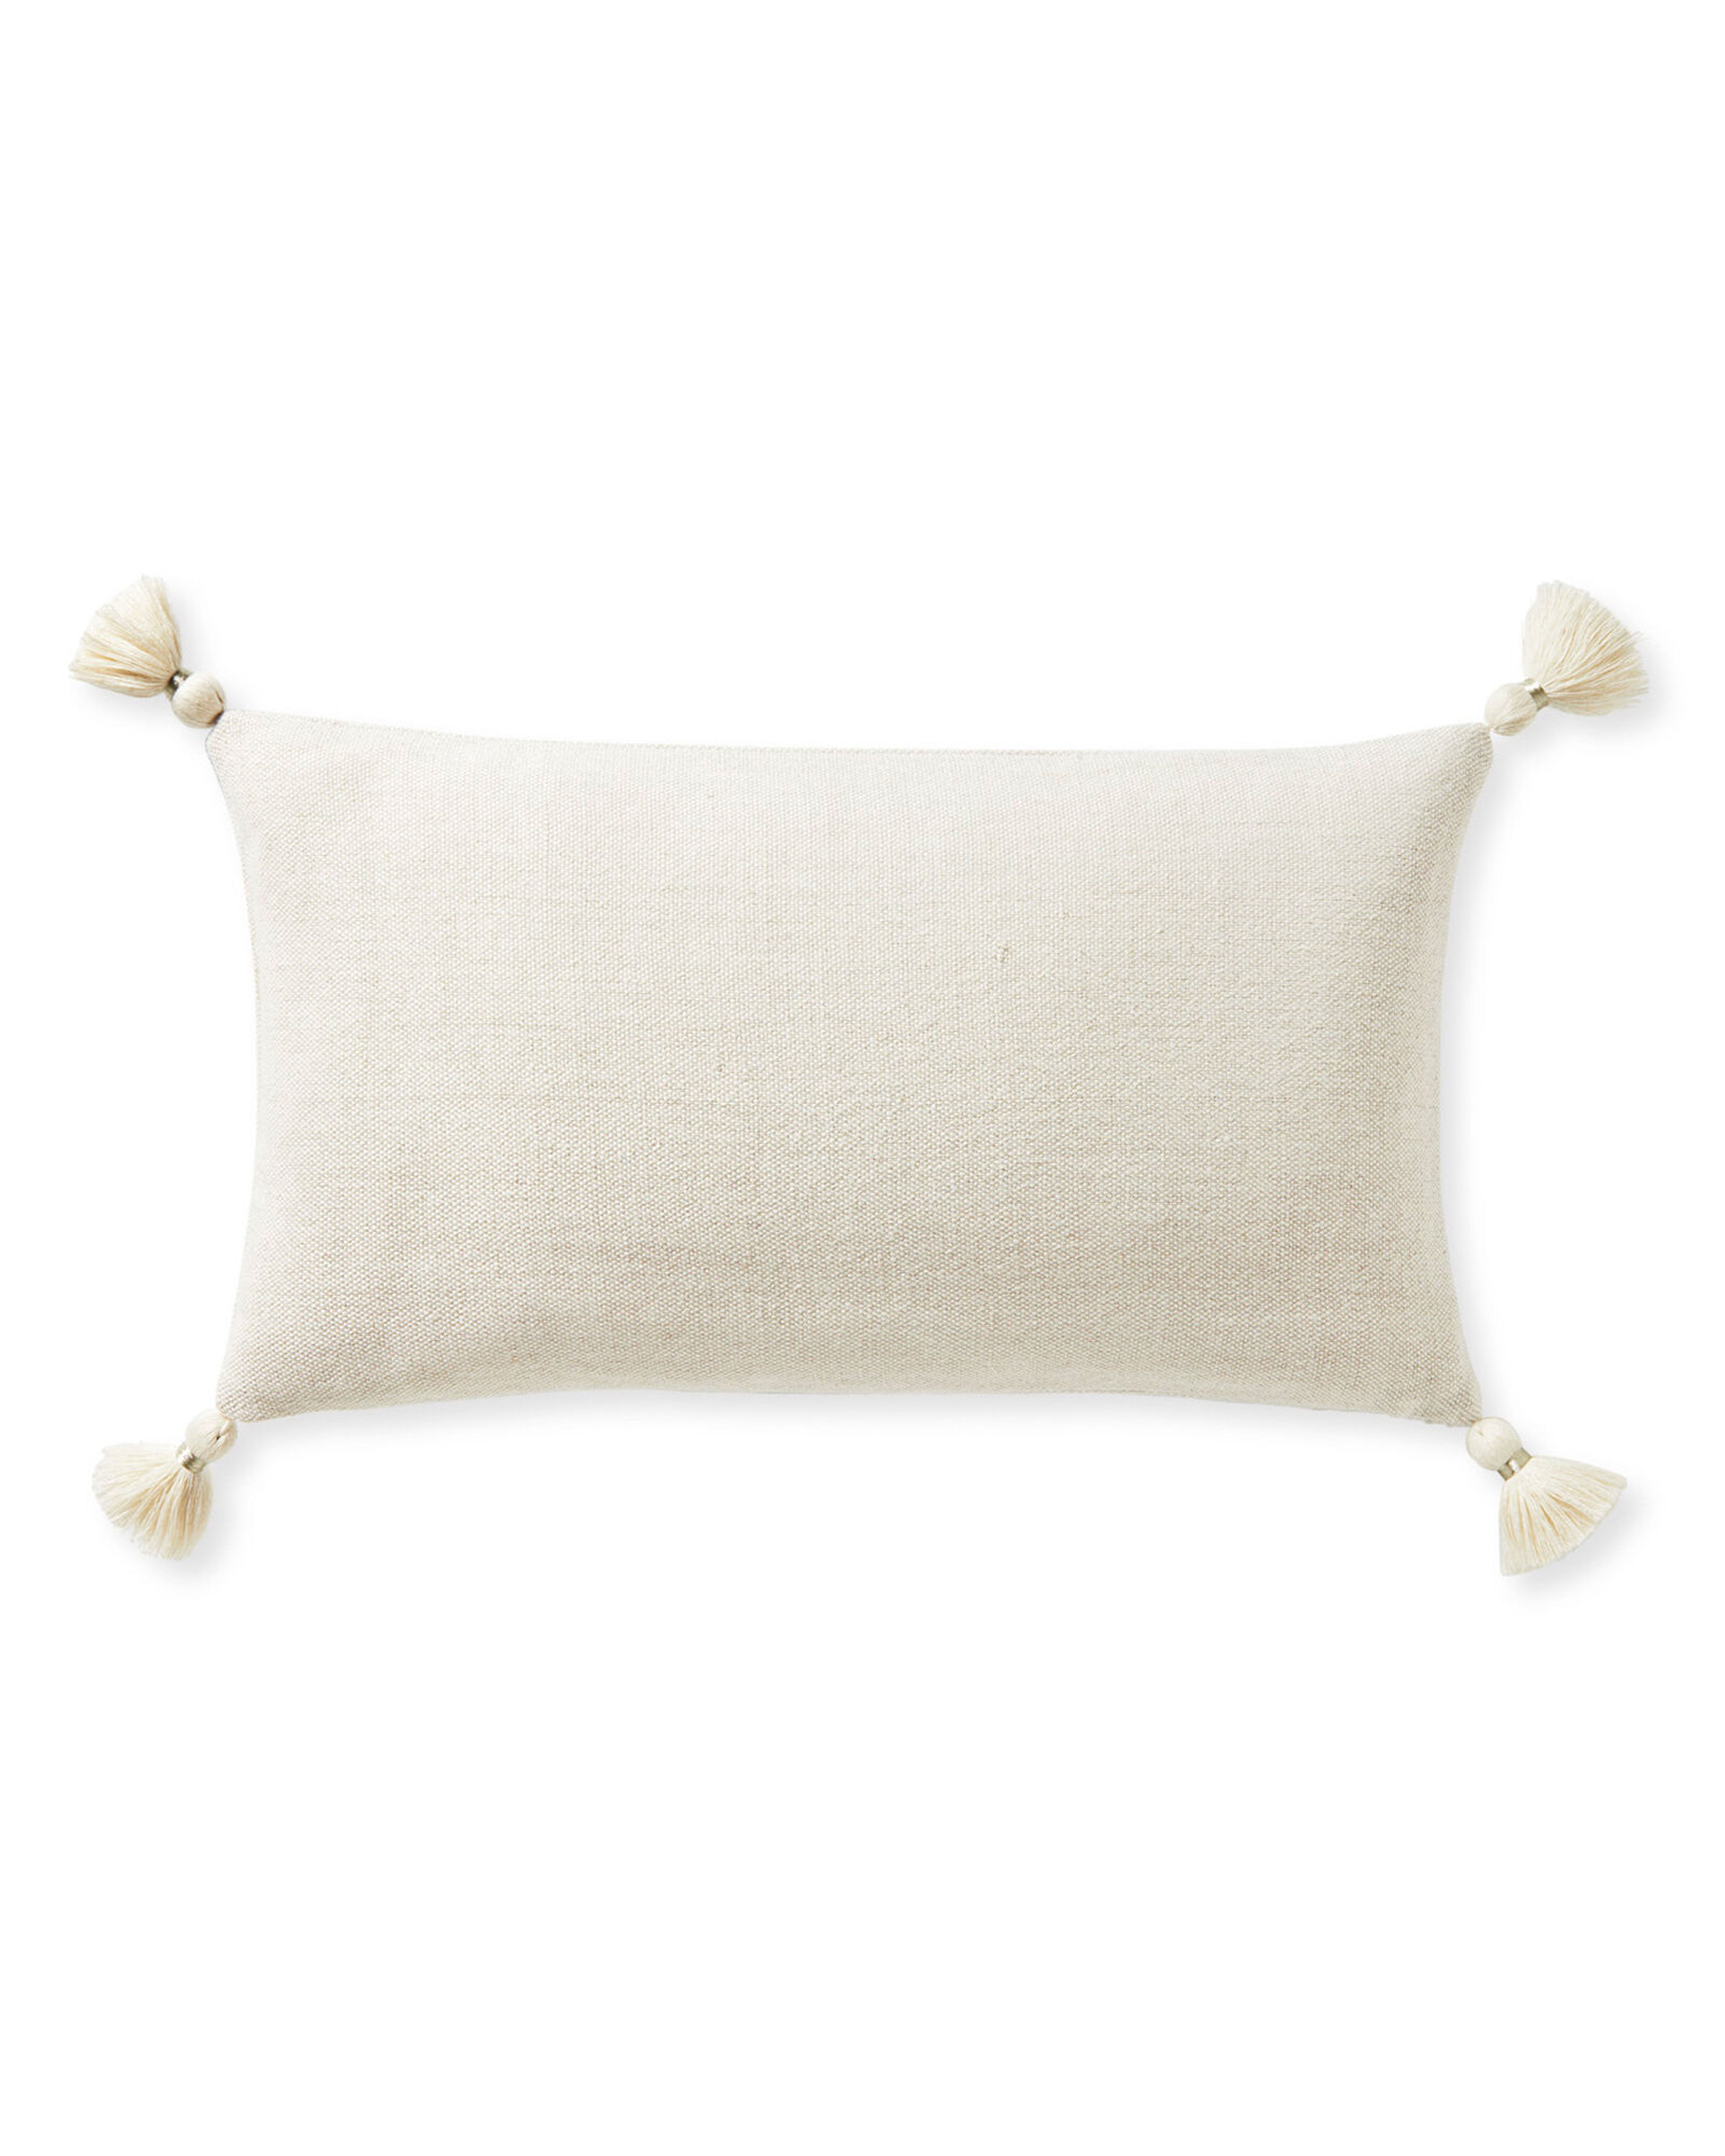 Eva Tassel Pillow Cover - Serena and Lily